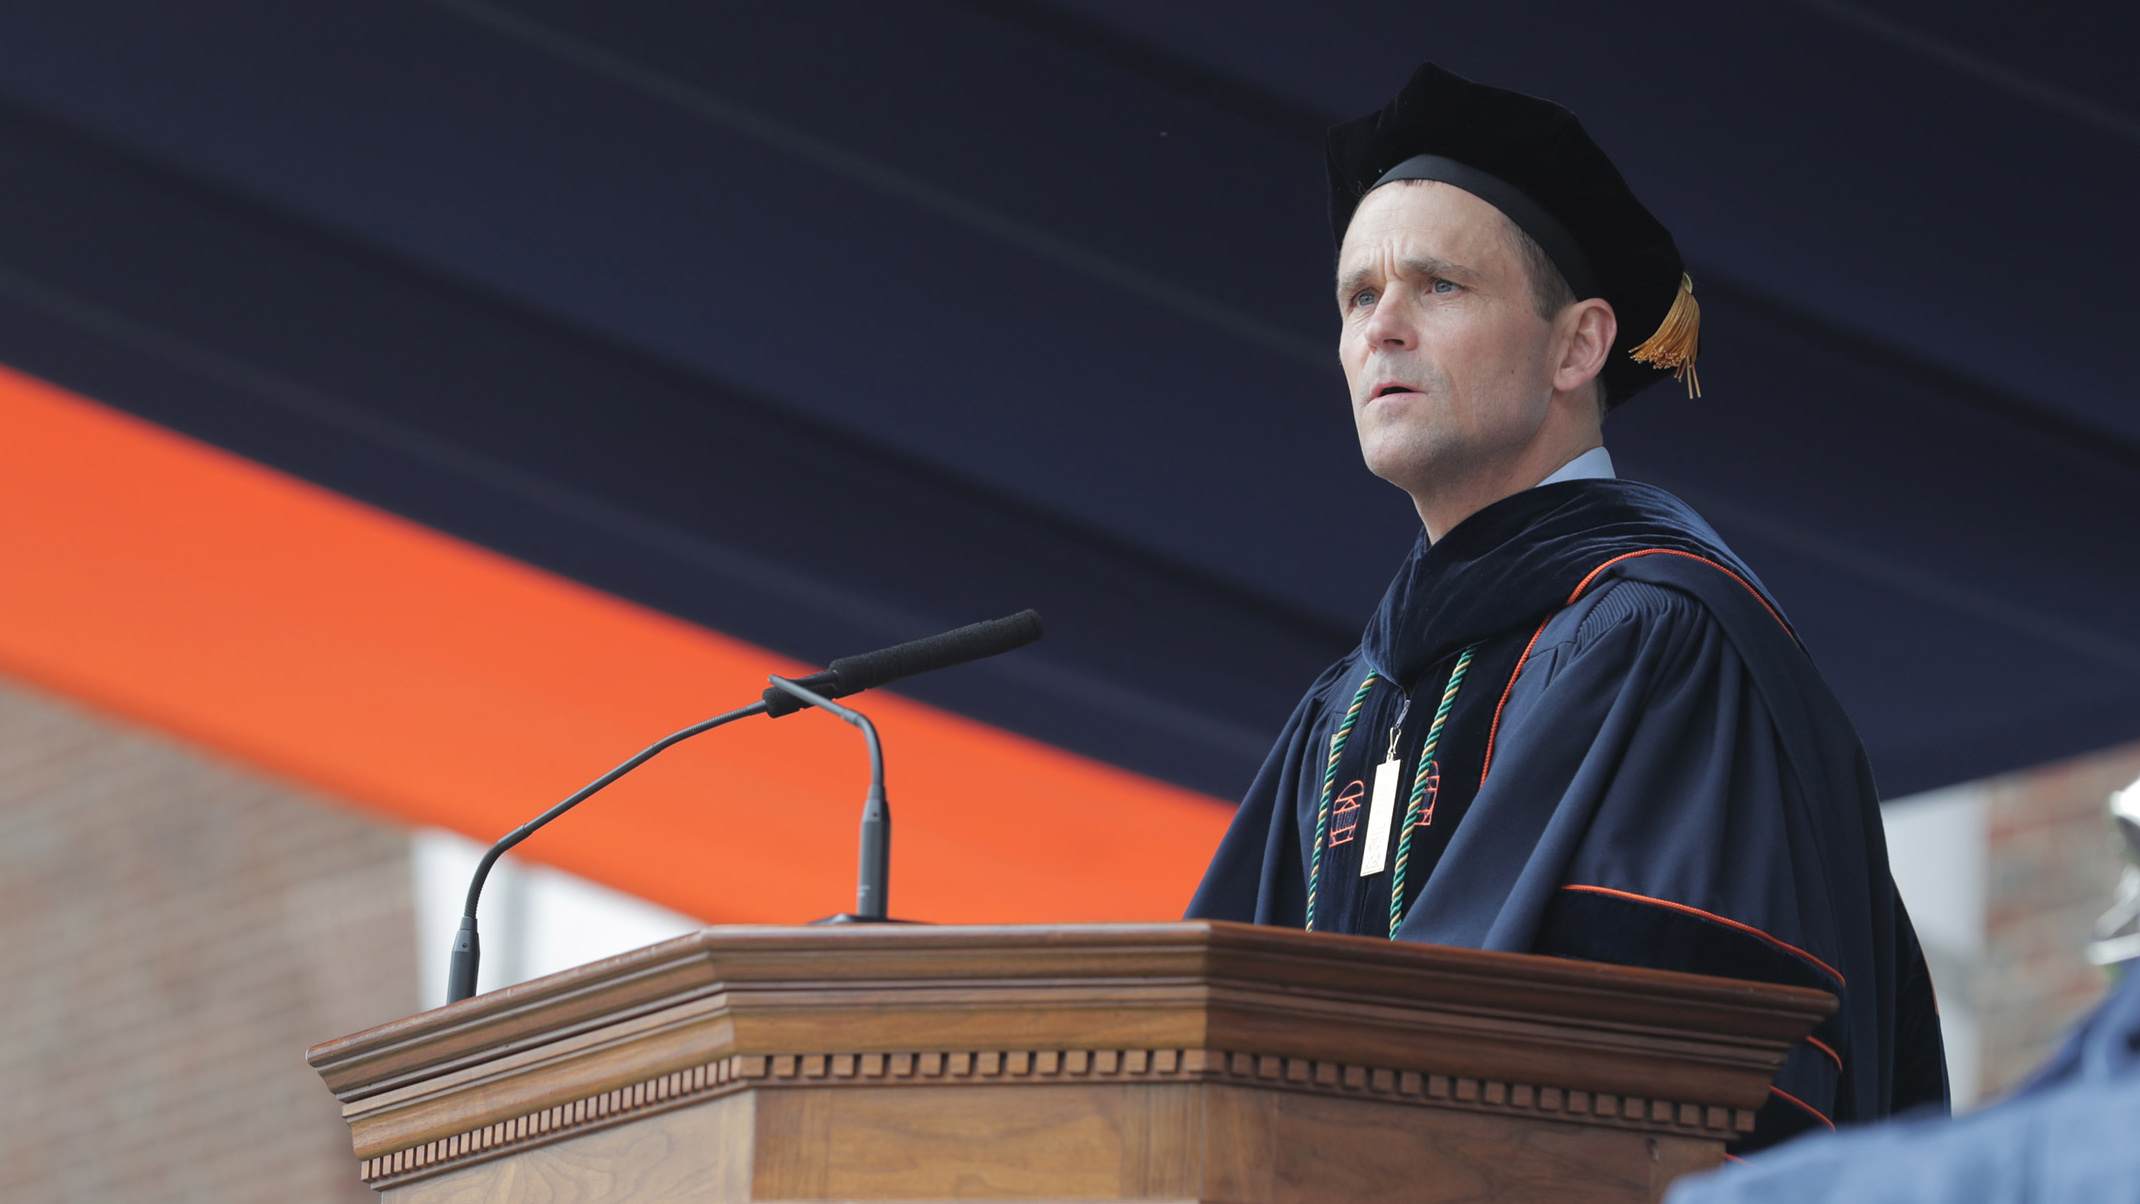 Jim Ryan speaking from a podium in Graduation attire outside